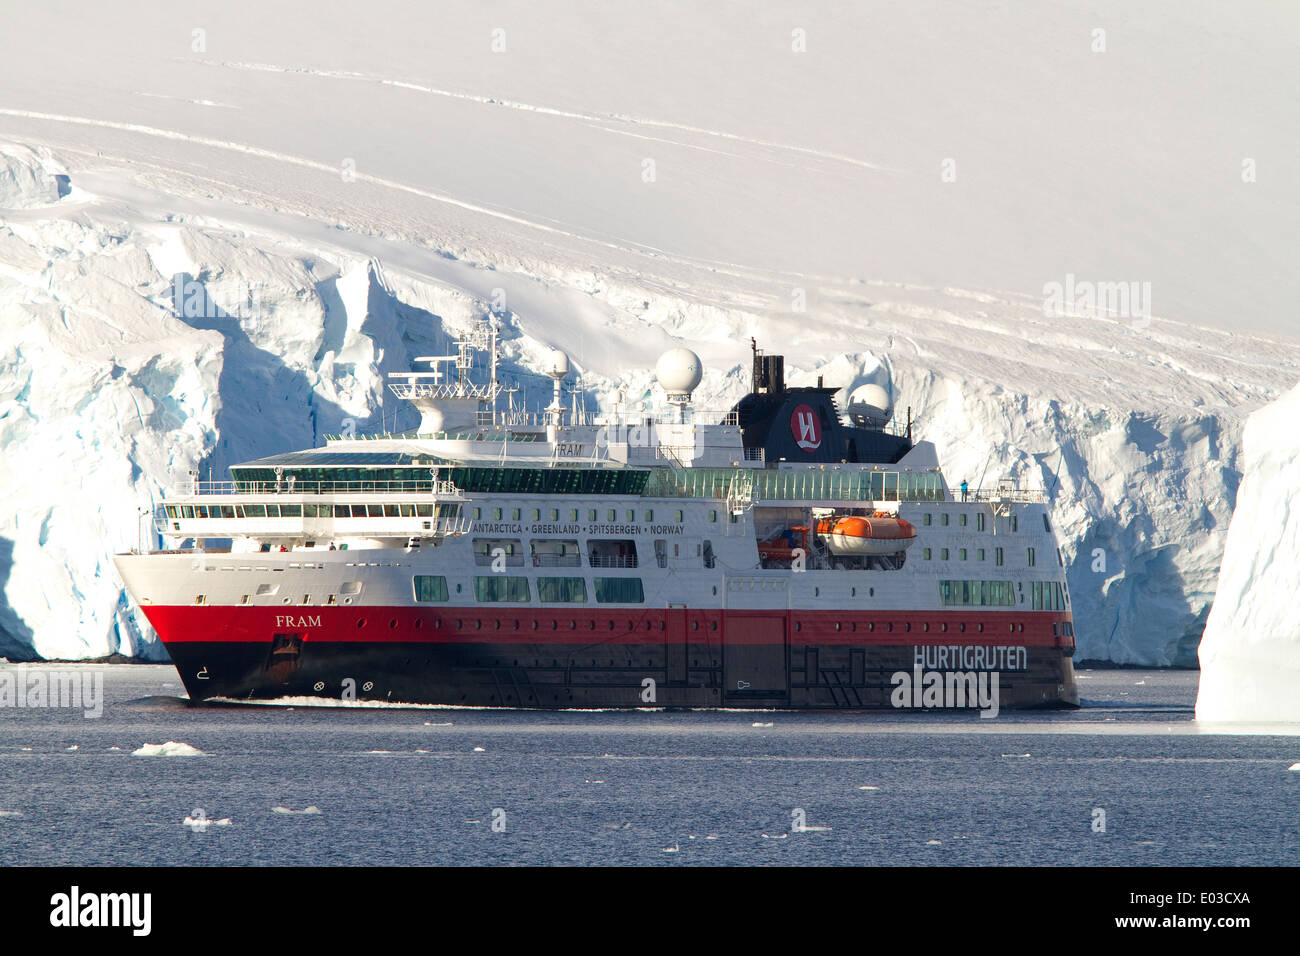 Cruise ship the Fram during a cruise in Antarctica with Antarctic glacier and iceberg. Stock Photo